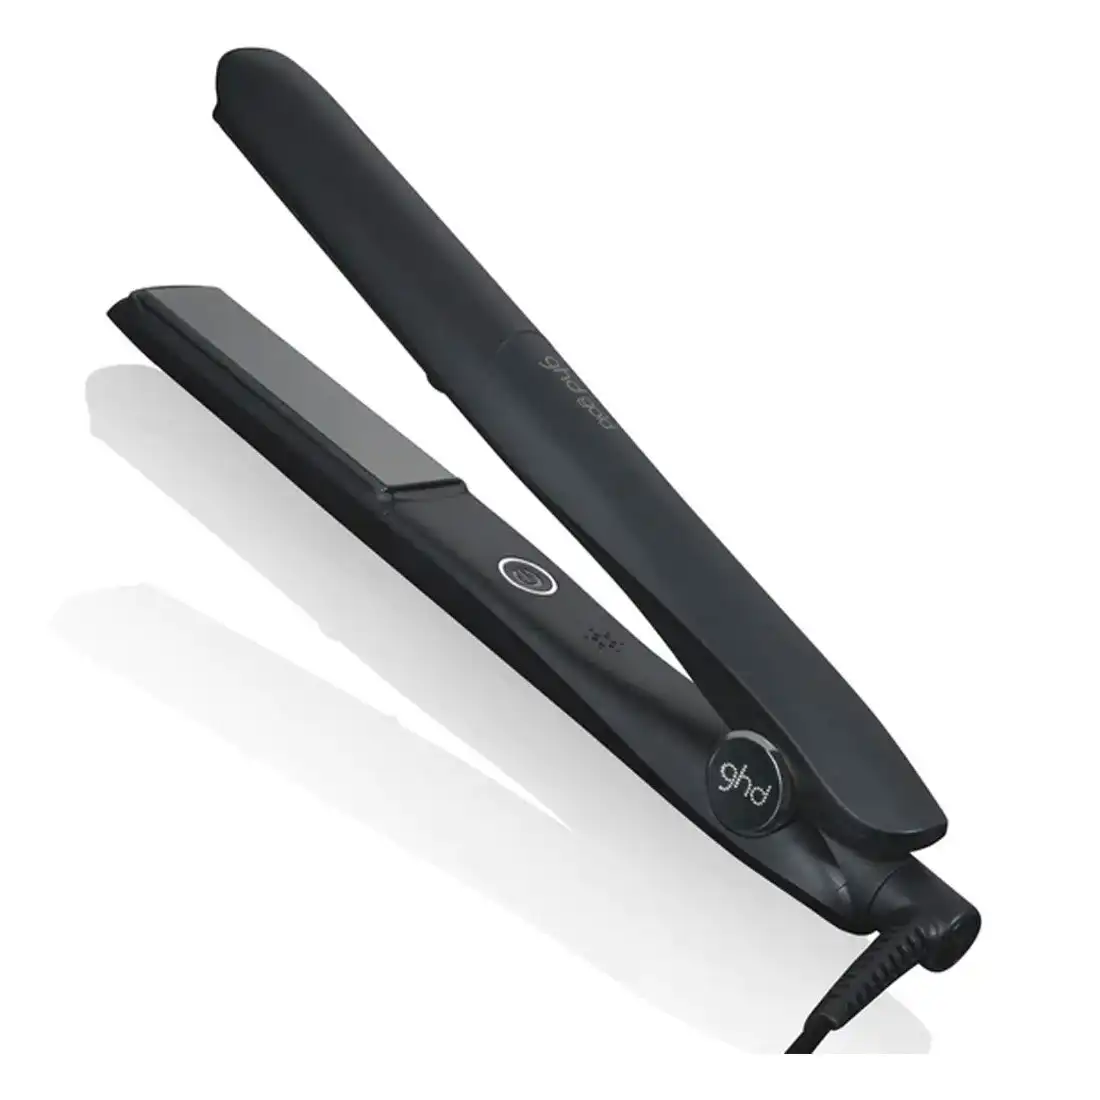 GHD Gold Styler Professional Hair Straighteners - Black